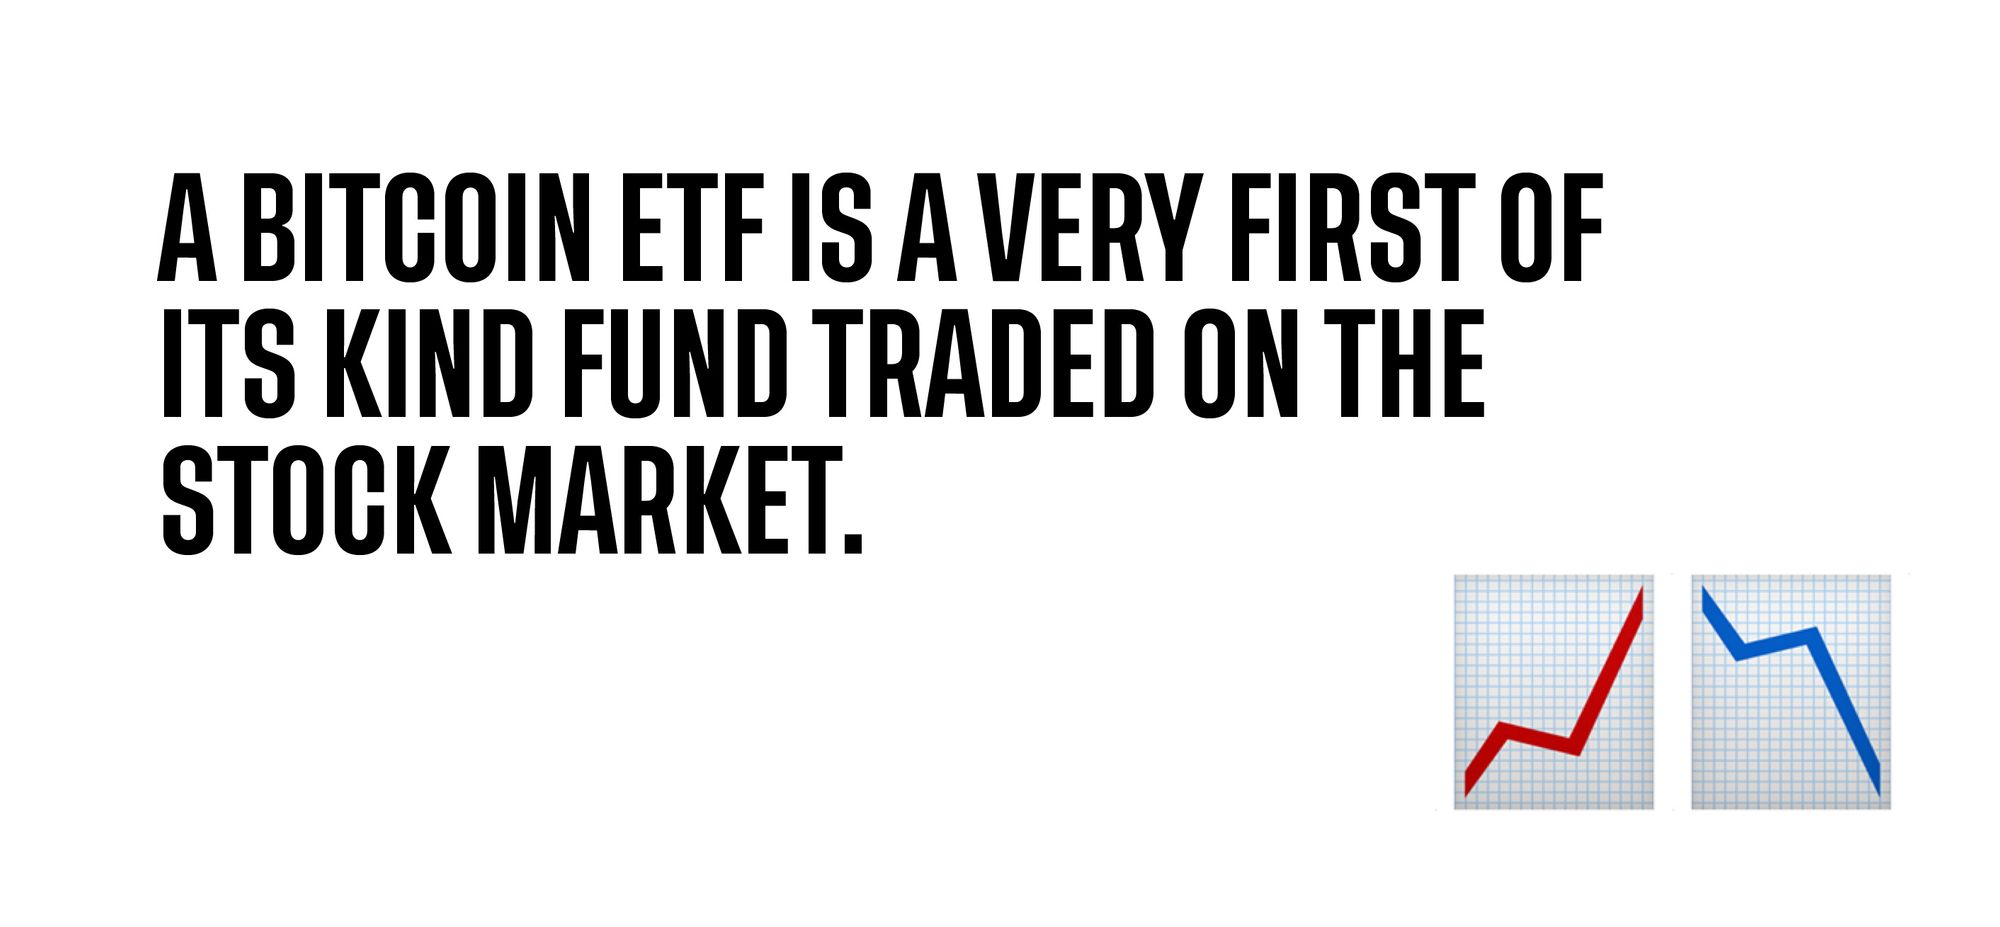 A bitcoin ETF is a very first of its kind fund traded on the stock market.